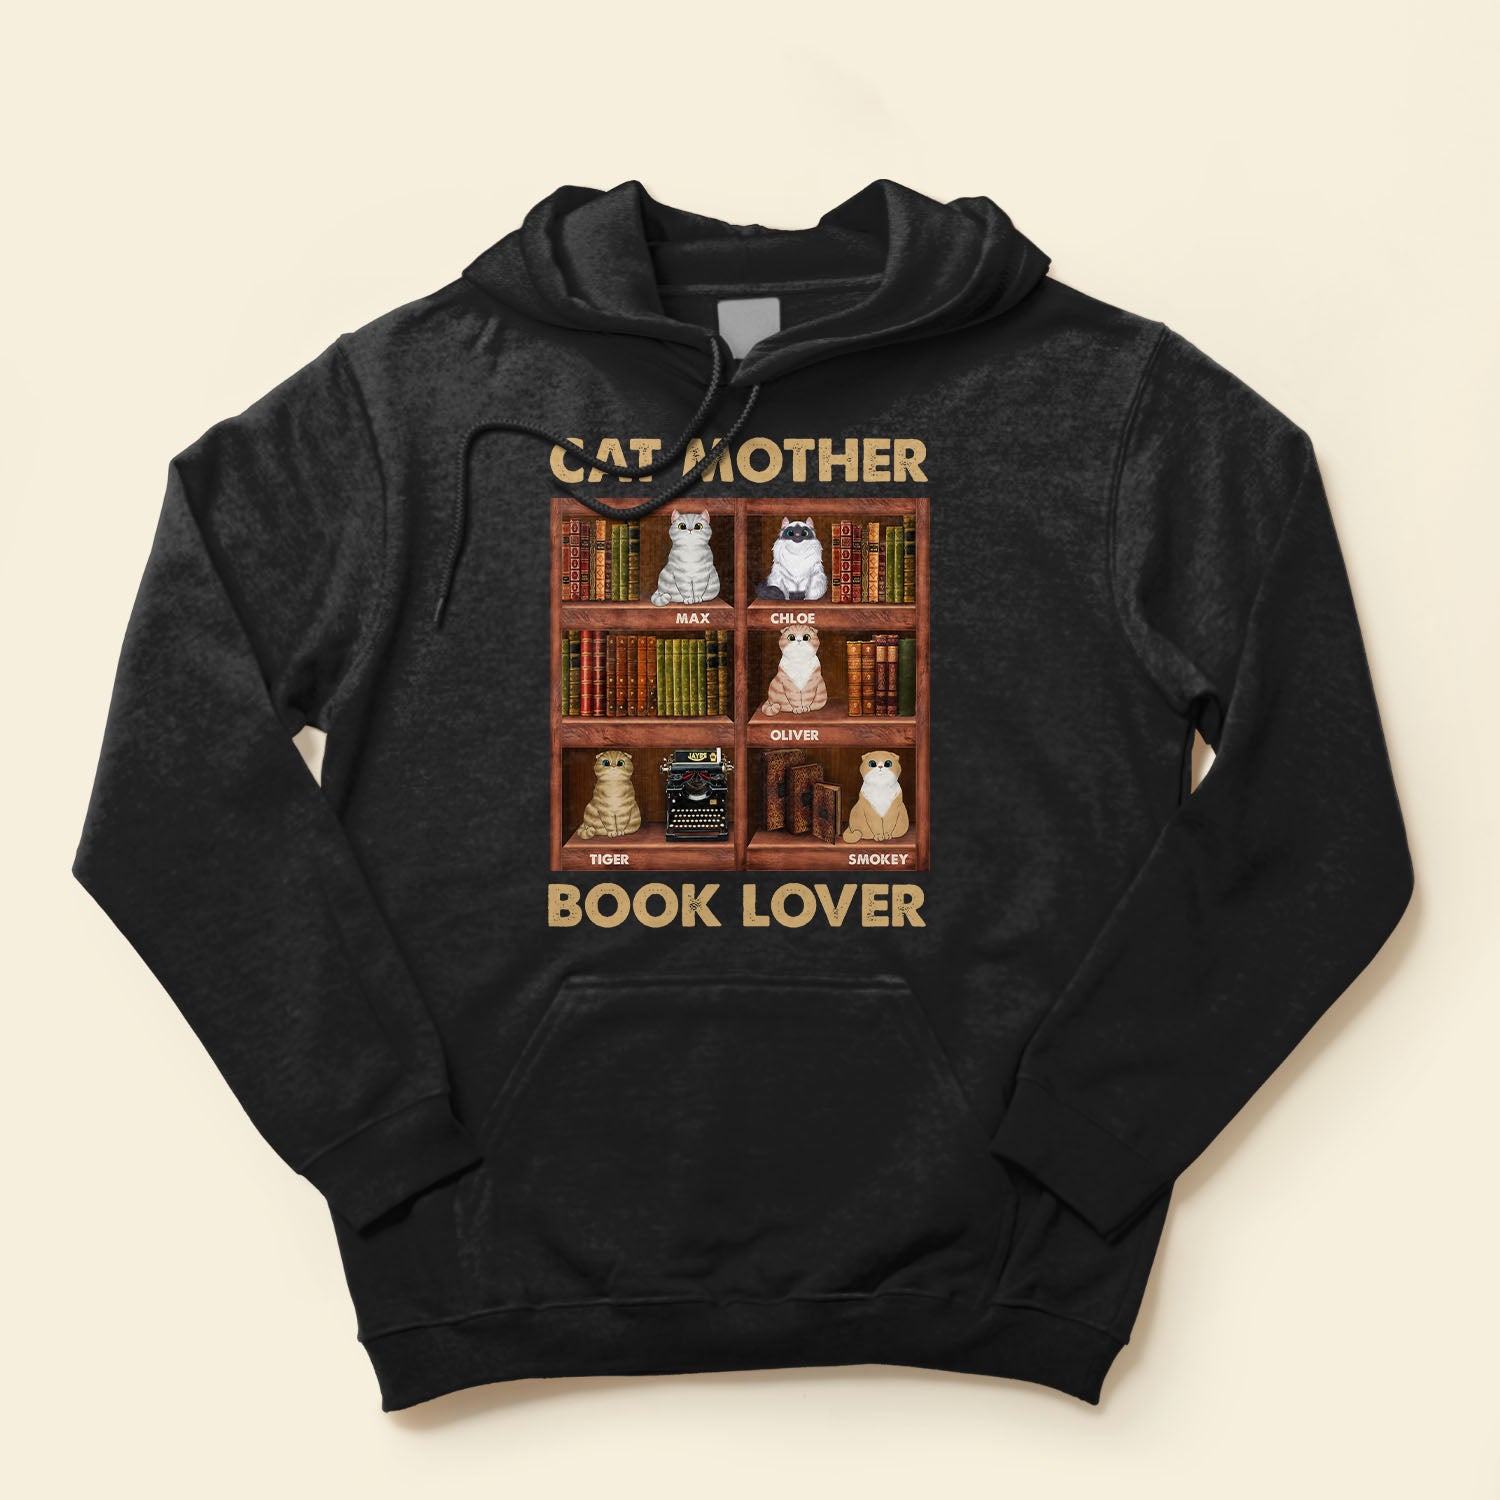 Cat Parents Book Lovers - Personalized Shirt - Birthday Gift For Cat Mom, Cat Dad